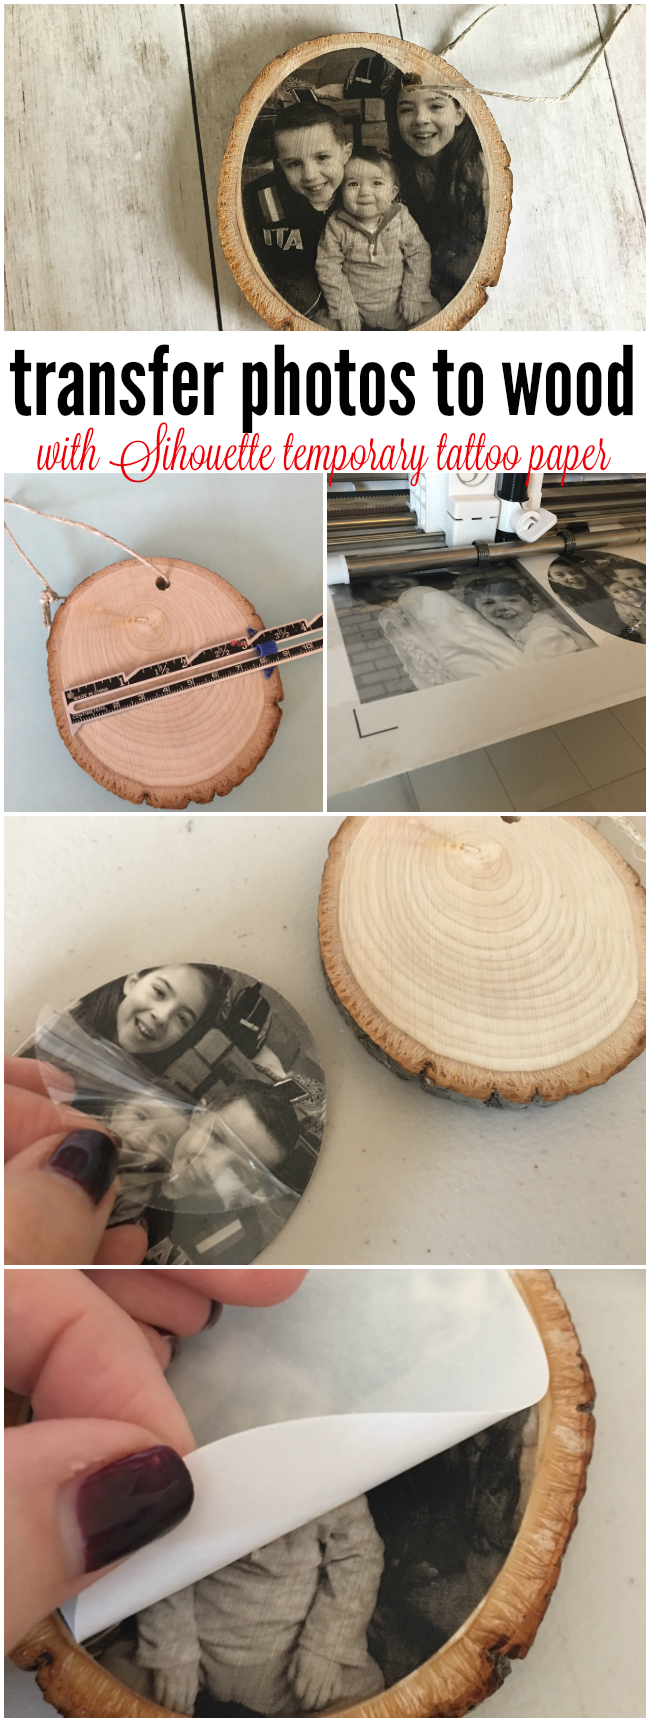 Make Photo Coasters with Silhouette Temporary Tattoo Paper